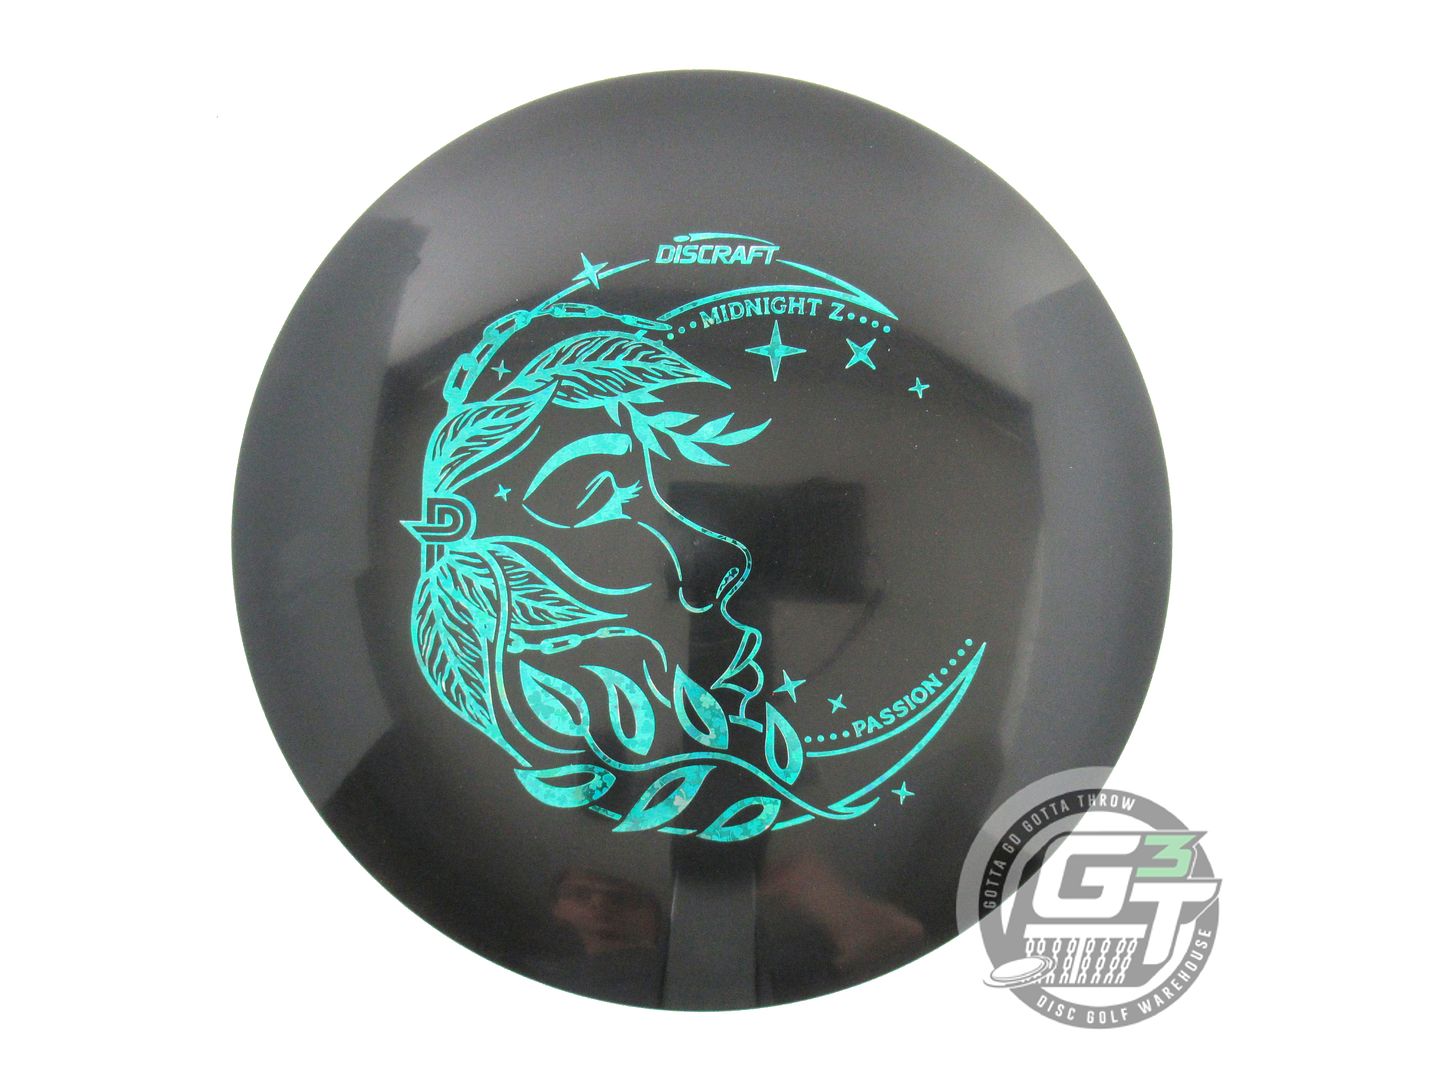 Discraft Limited Edition 2023 Elite Team Paige Pierce Midnight Elite Z Passion Fairway Driver Golf Disc (Individually Listed)